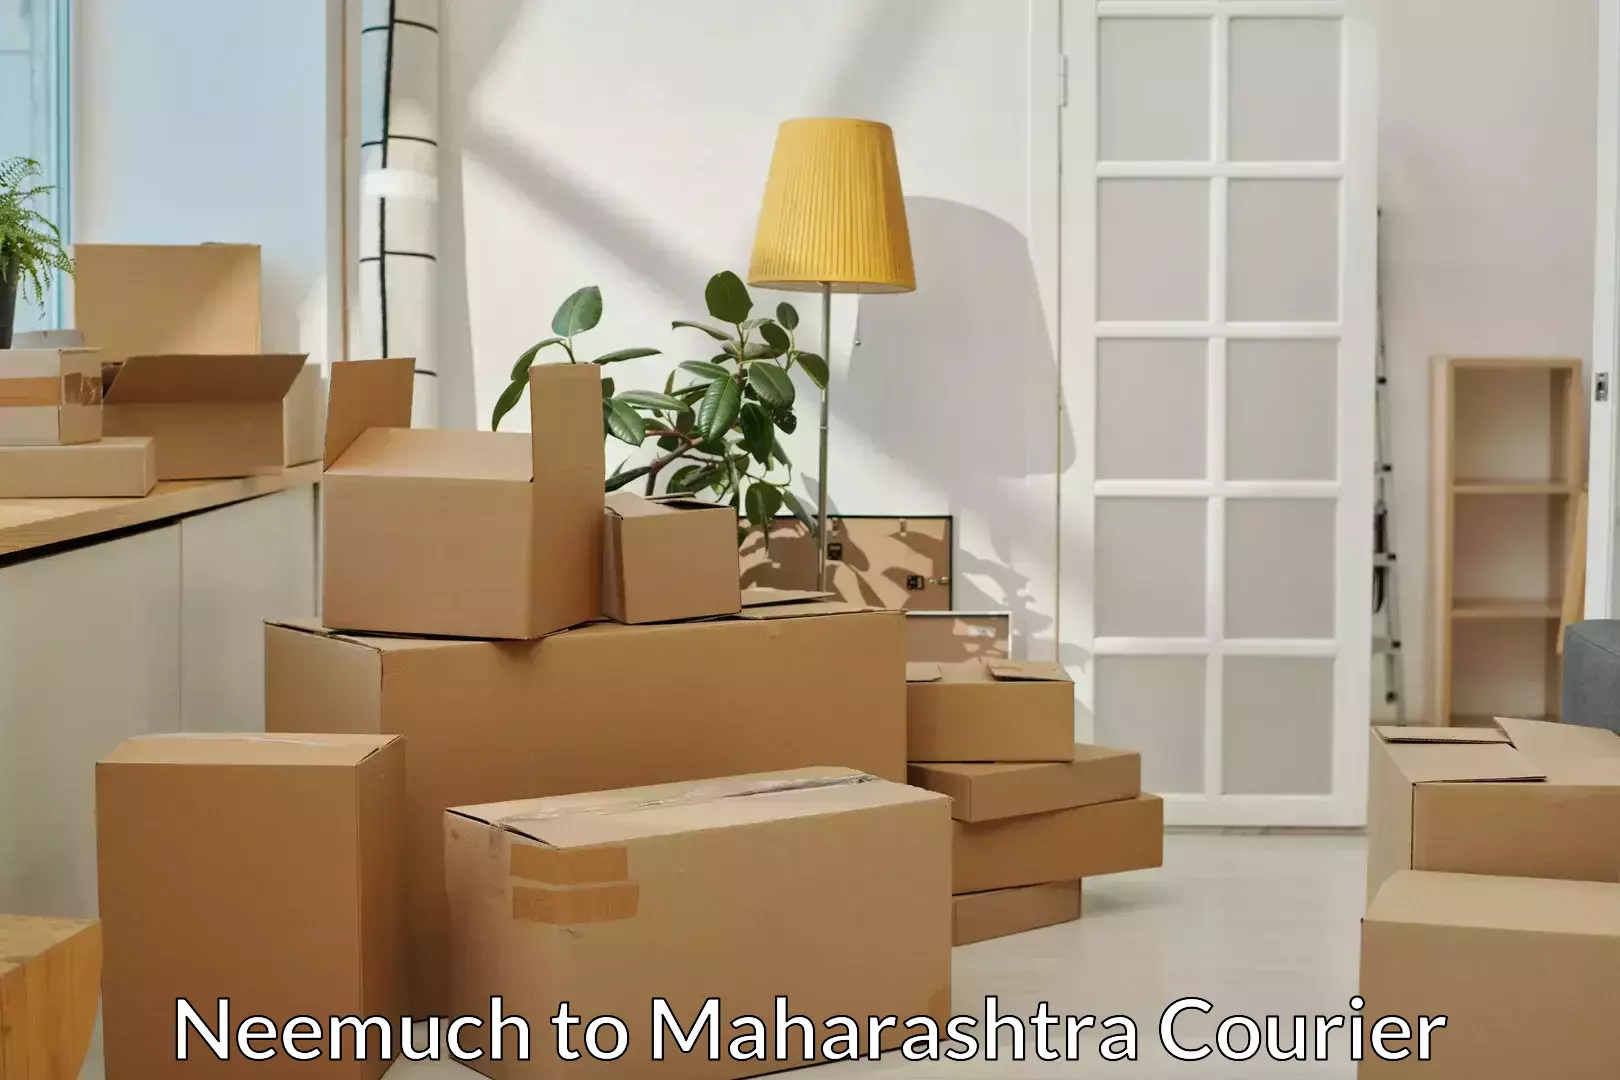 Furniture moving and handling Neemuch to DY Patil Vidyapeeth Mumbai